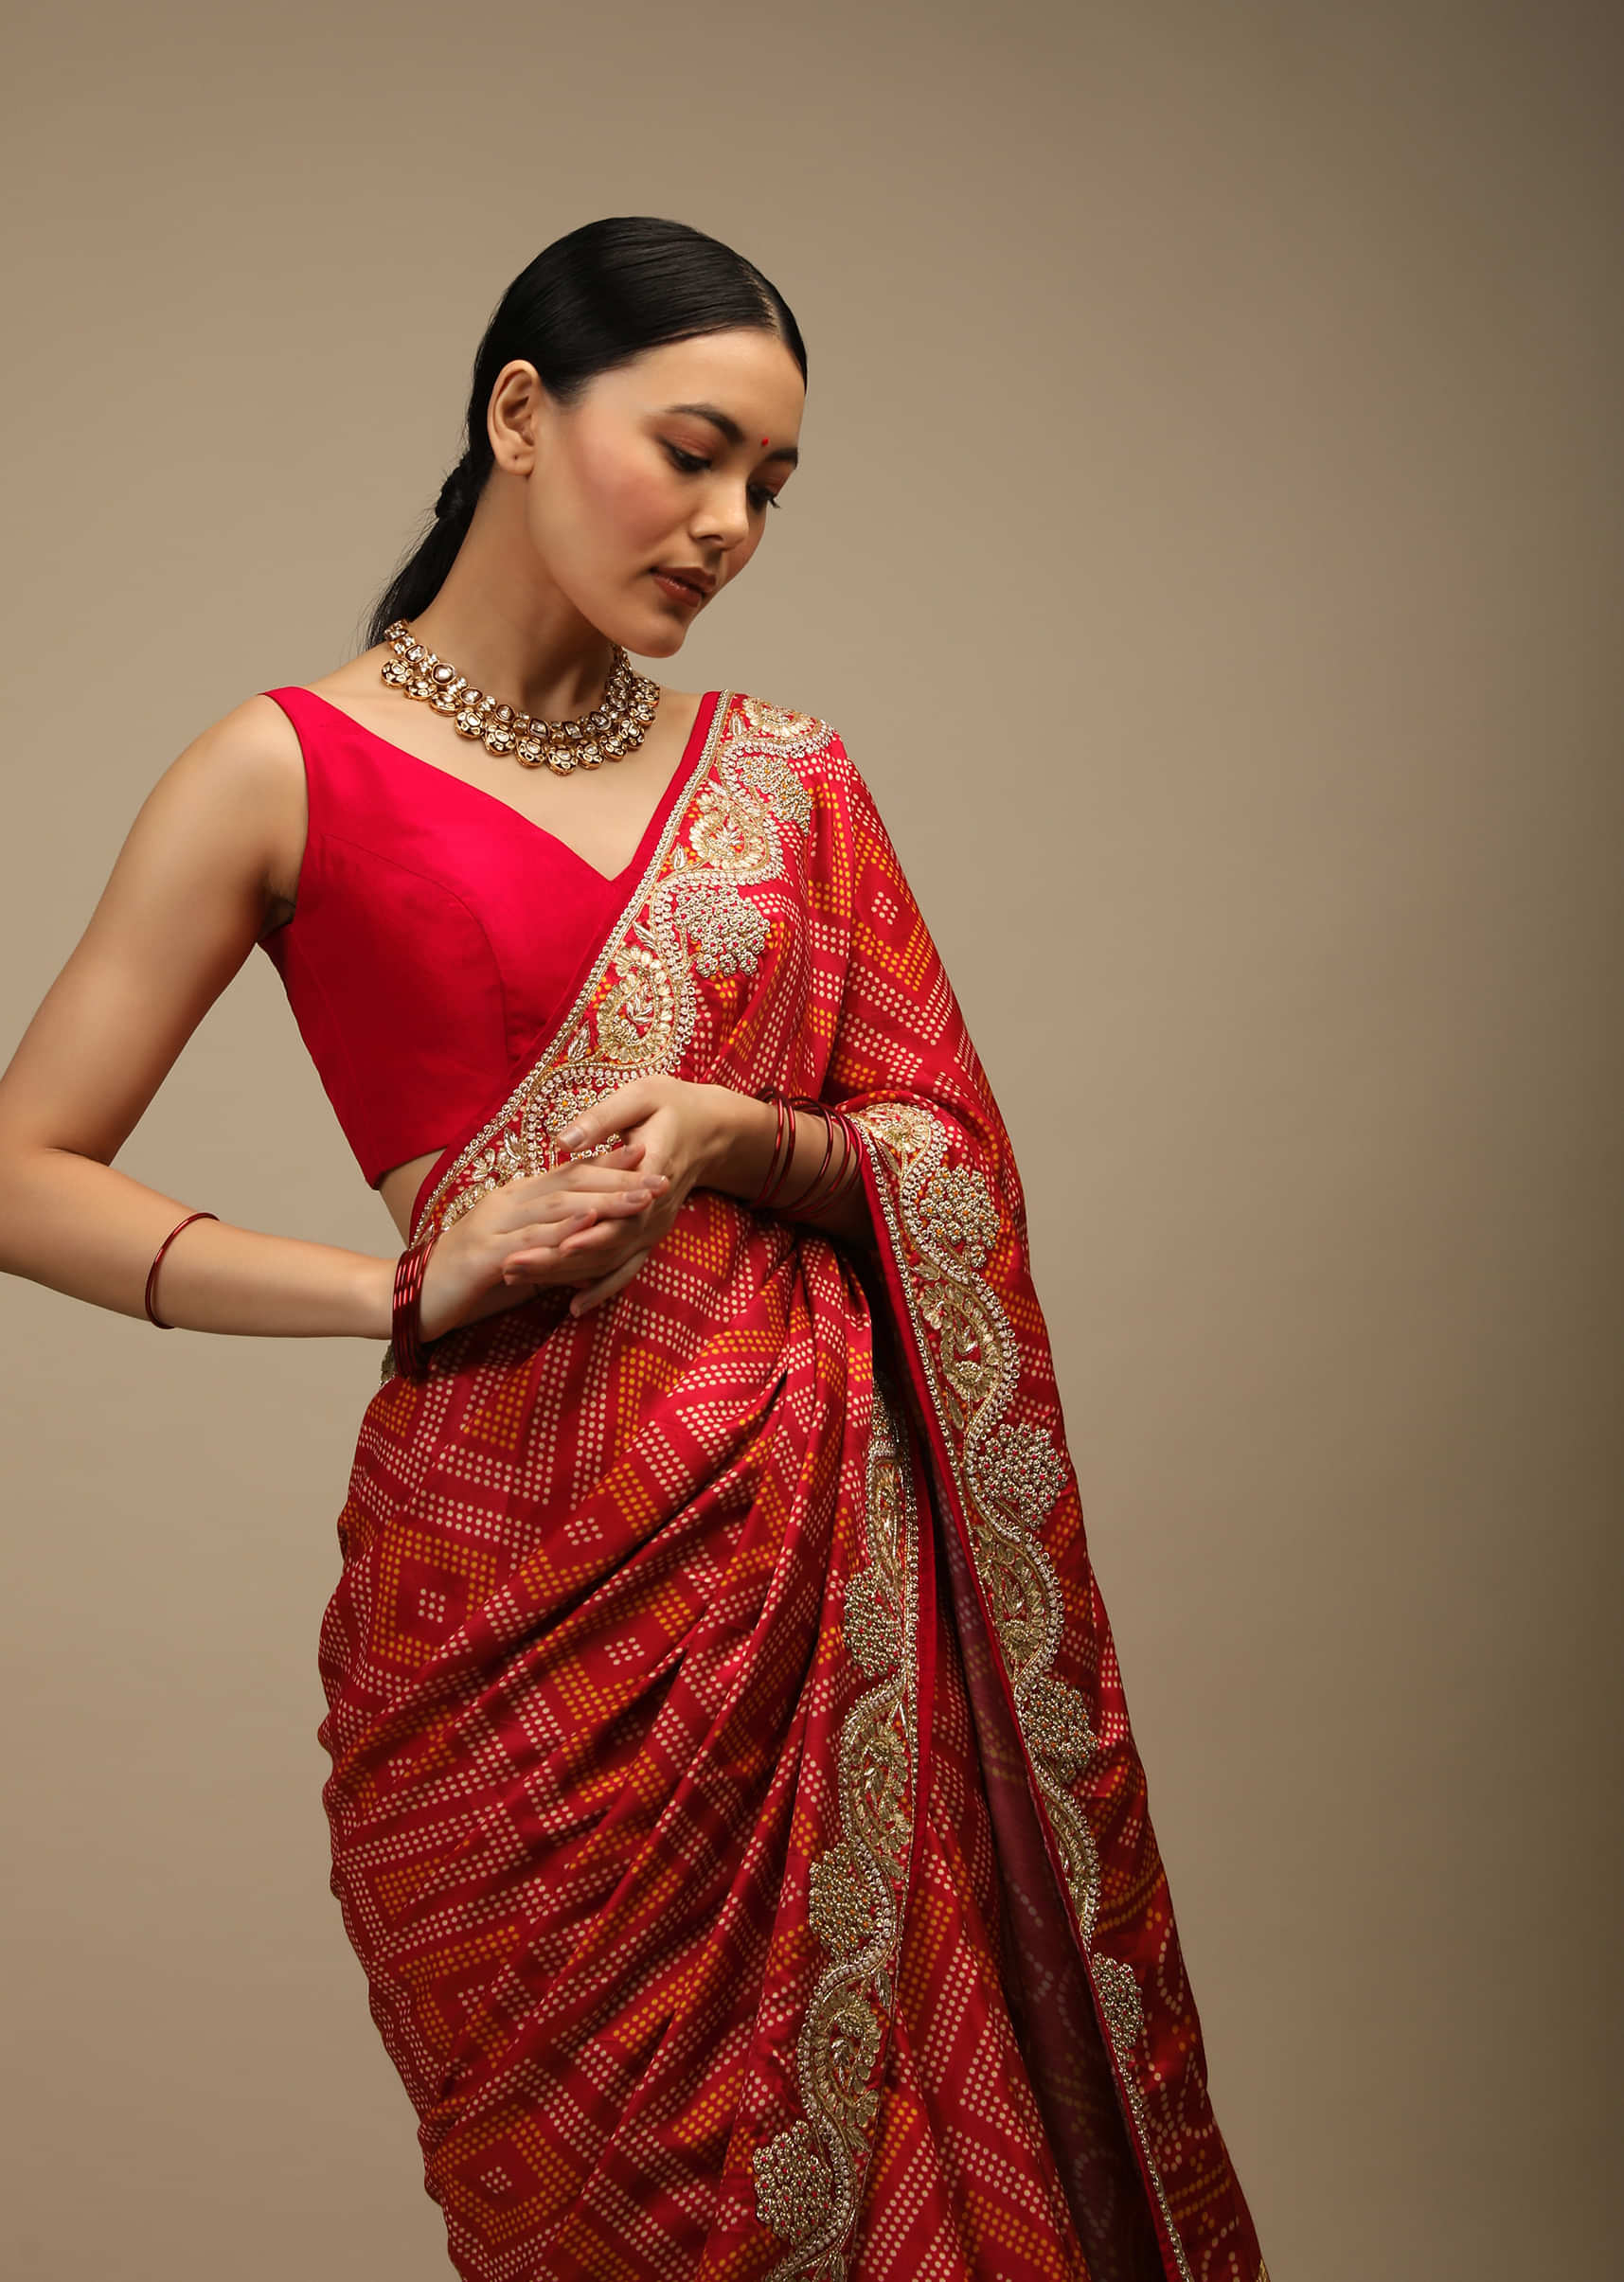 Apple Red Saree In Satin With Dot Print And Brocade Pallu Adorned In Gotta Patti Embroidered Ethnic Motifs Online - Kalki Fashion